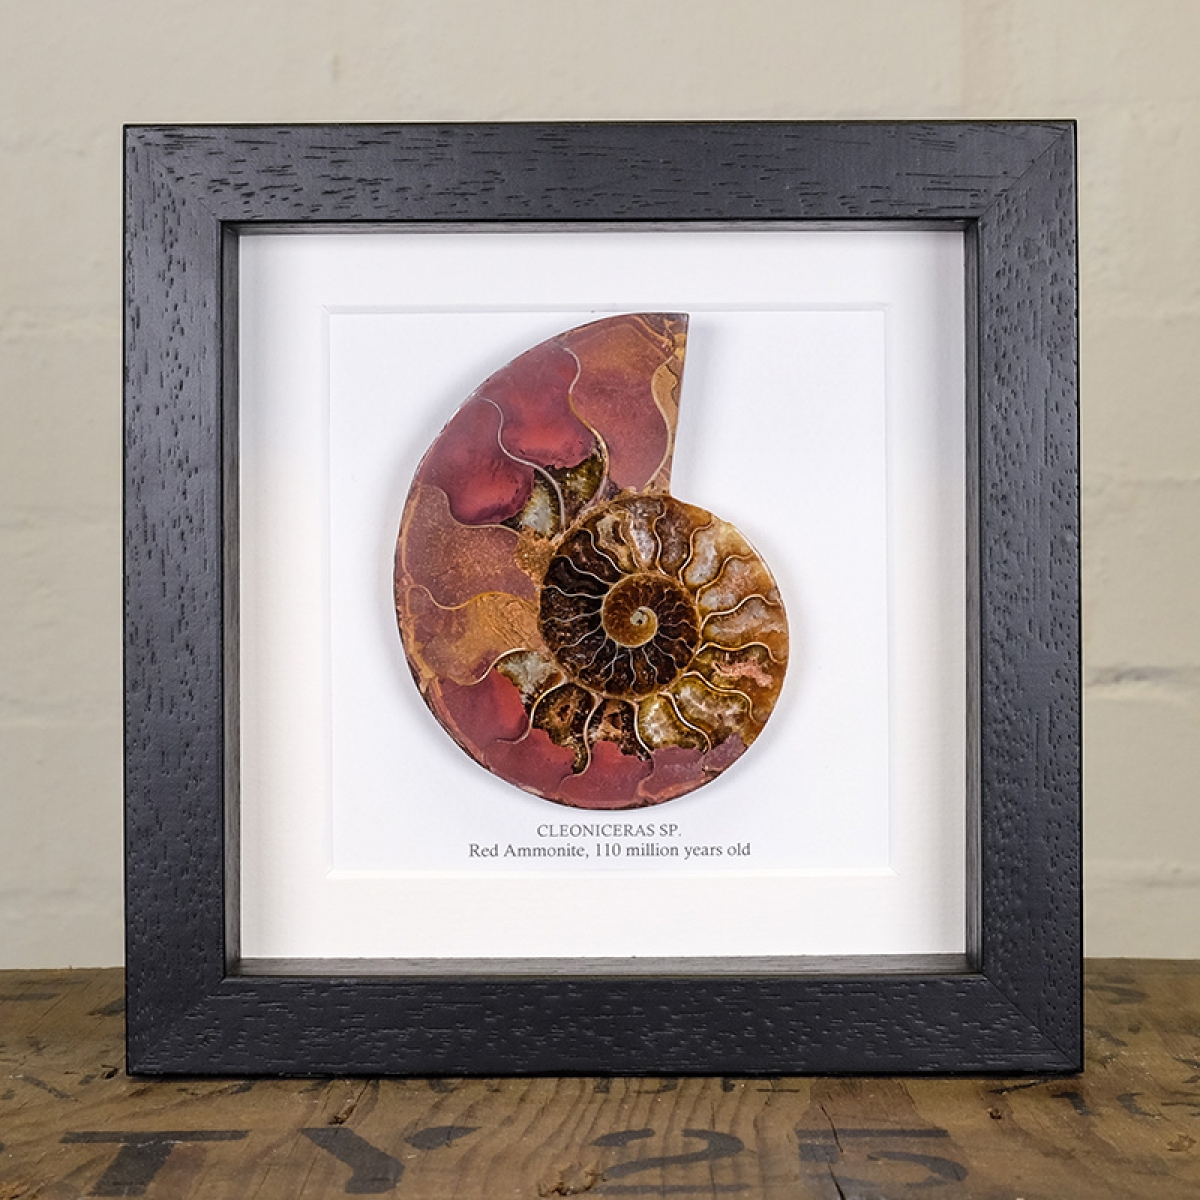 Minibeast Rare Red Ammonite Cut and Polished Fossil in Box Frame (Cleoniceras sp)